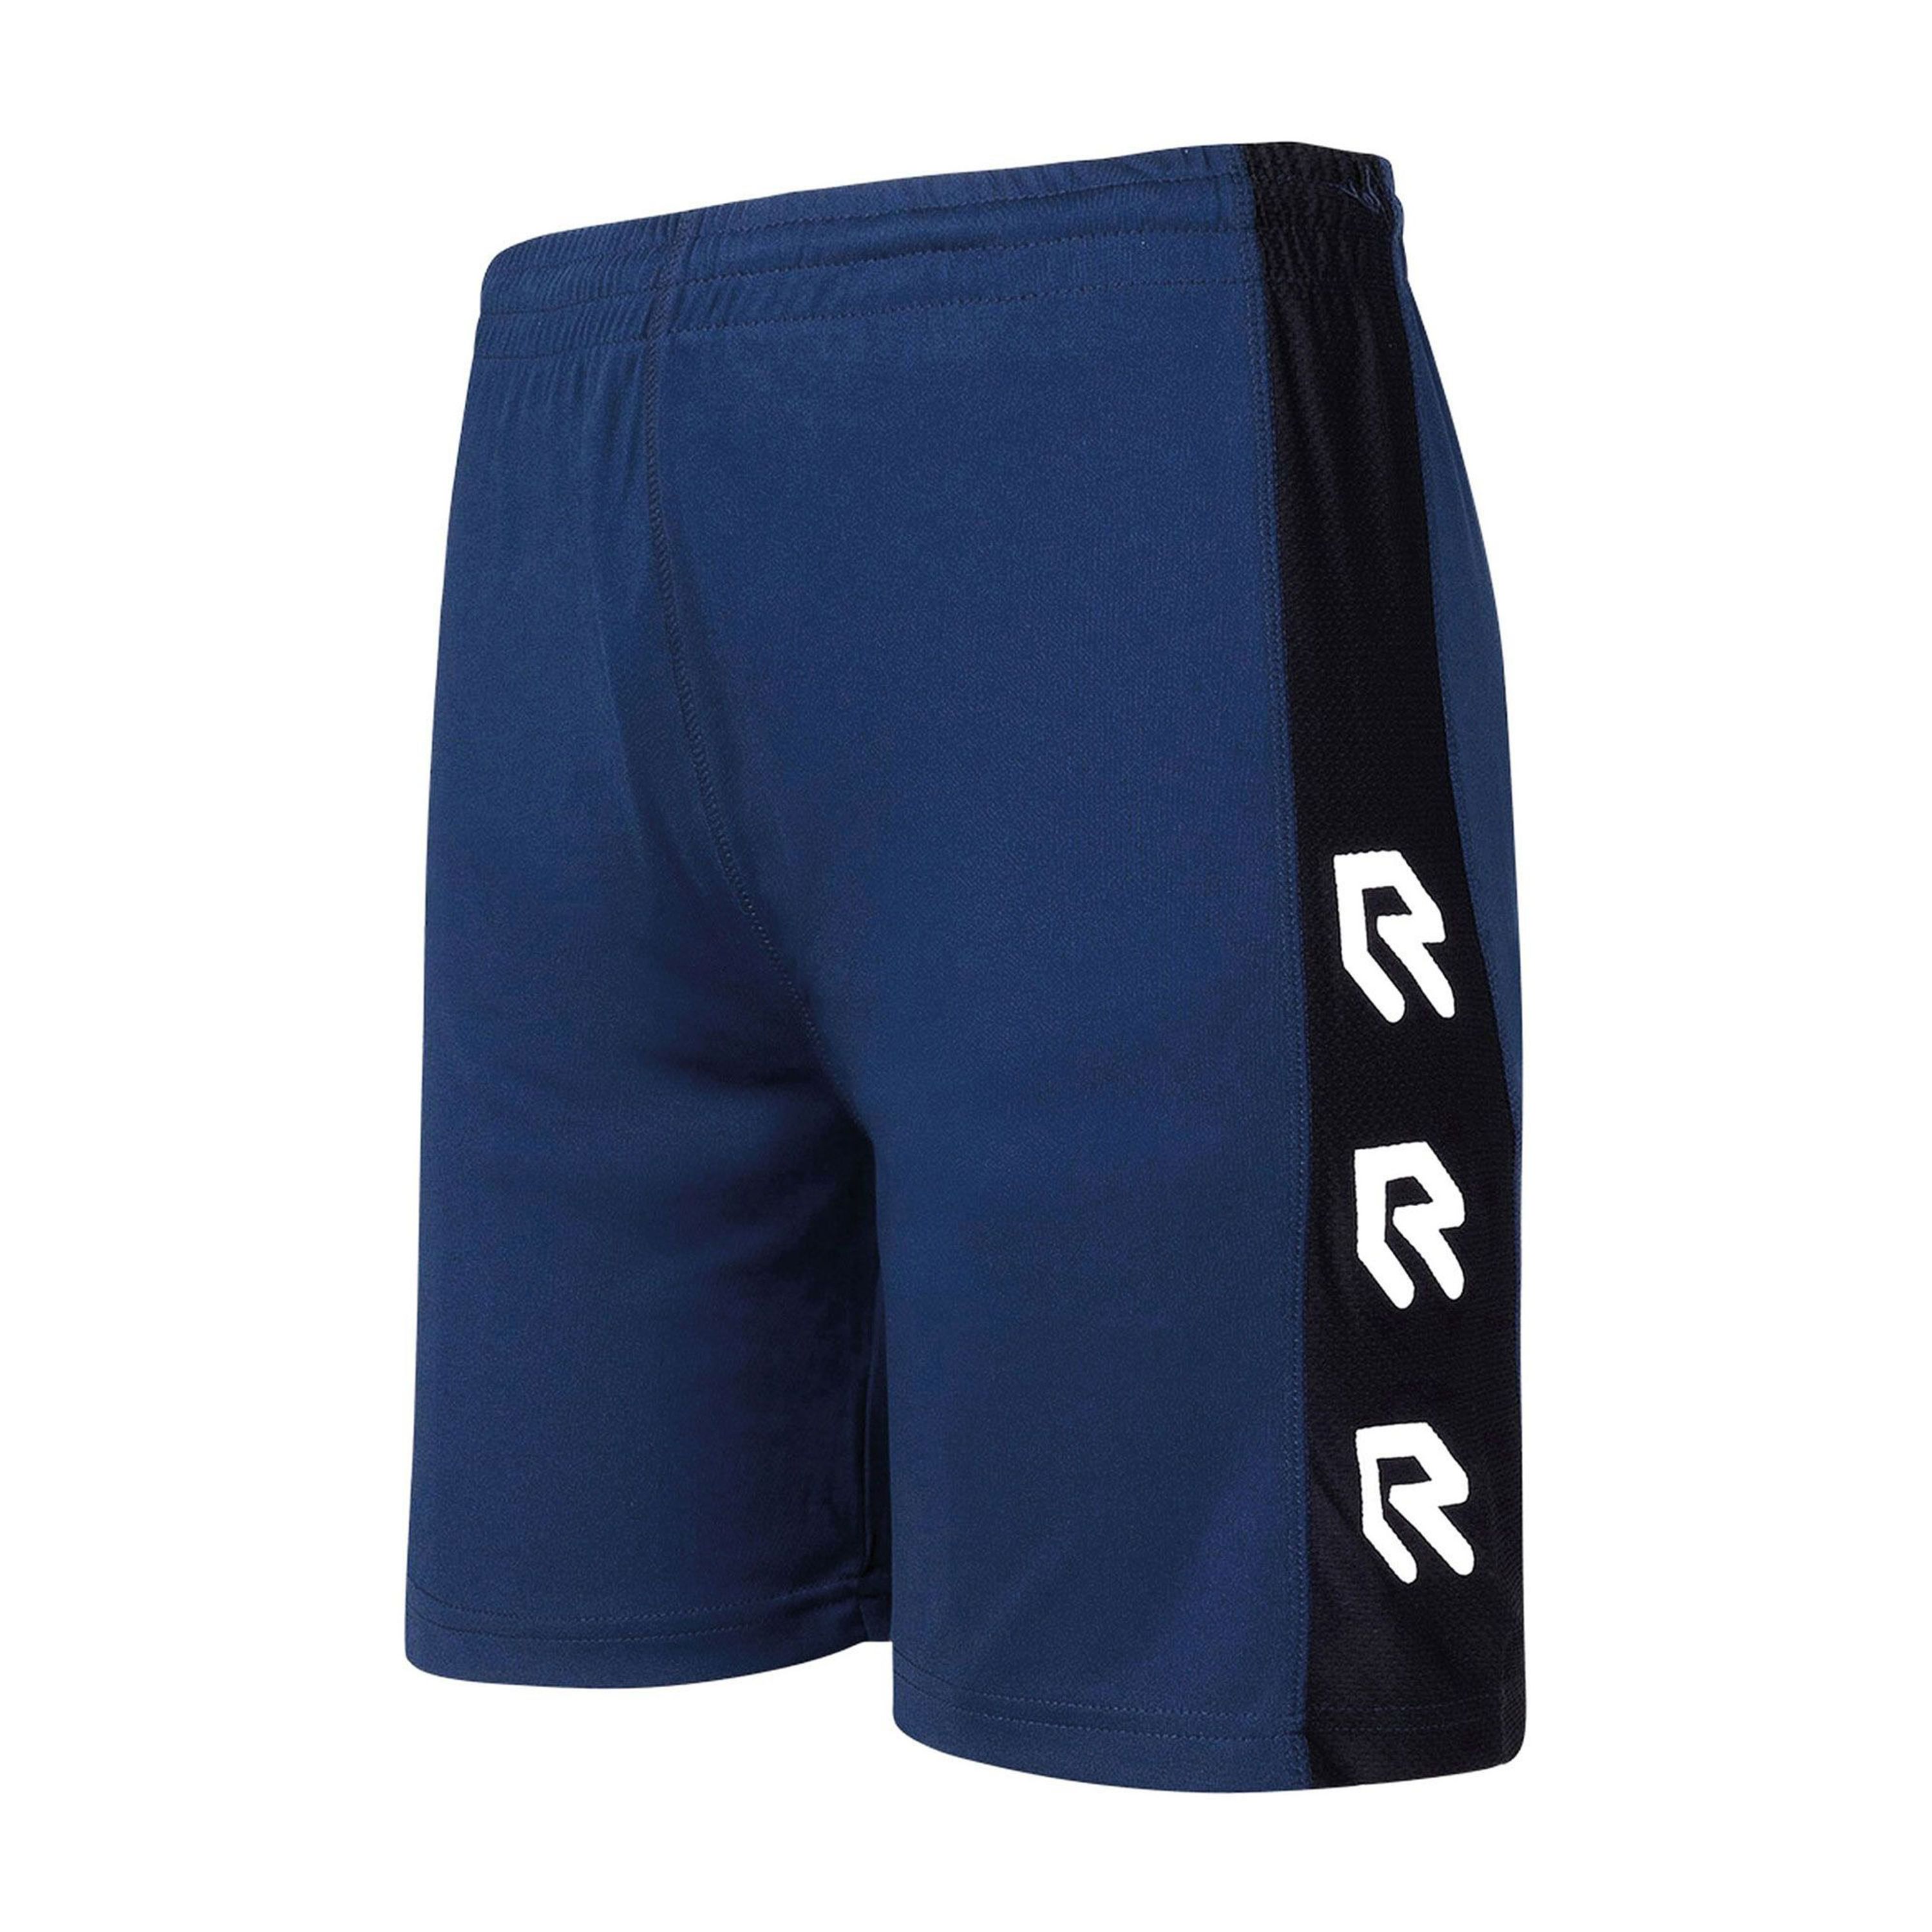 Robey Perfor ce Short Junior